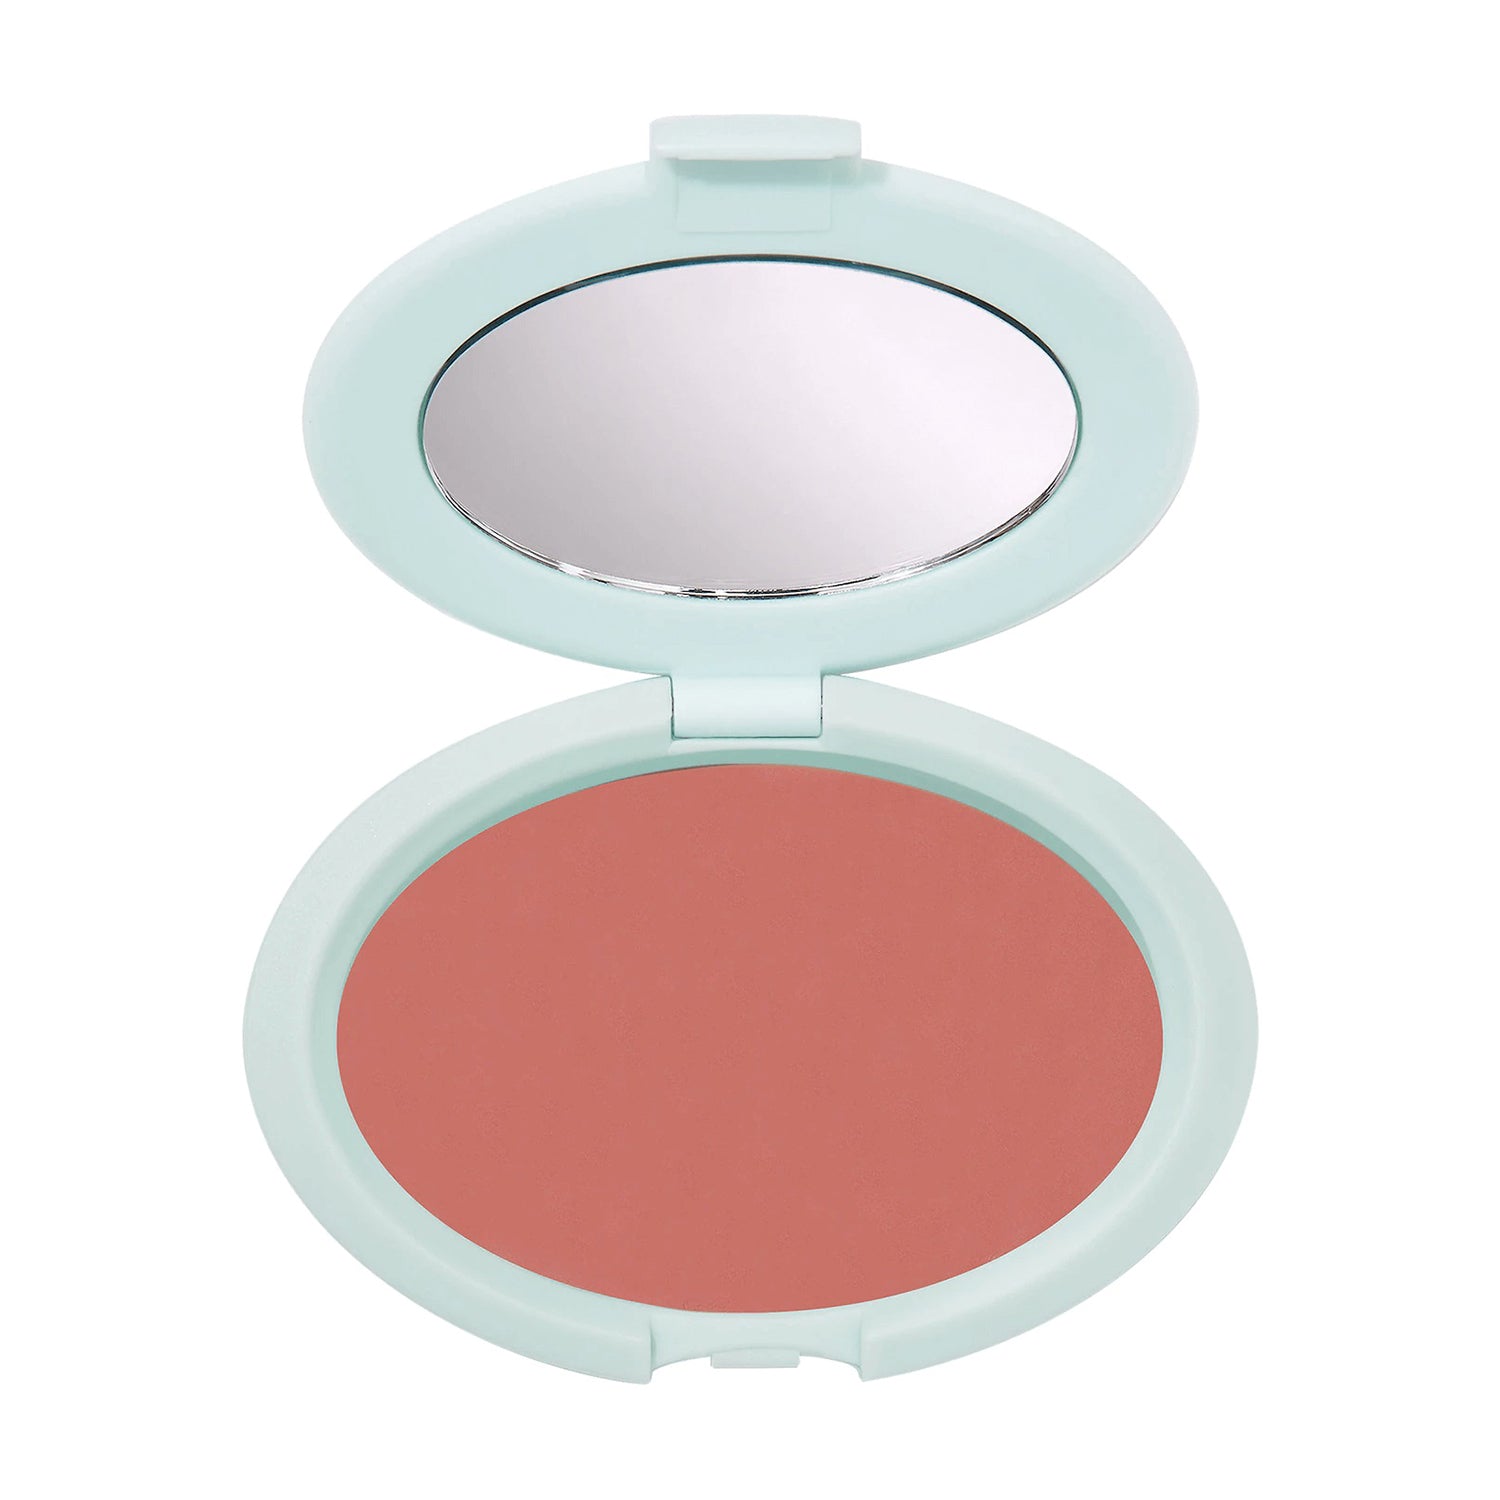 shop Tarte cream blush in peach sunset shade available at Heygirl.pk for delivery in Pakistan